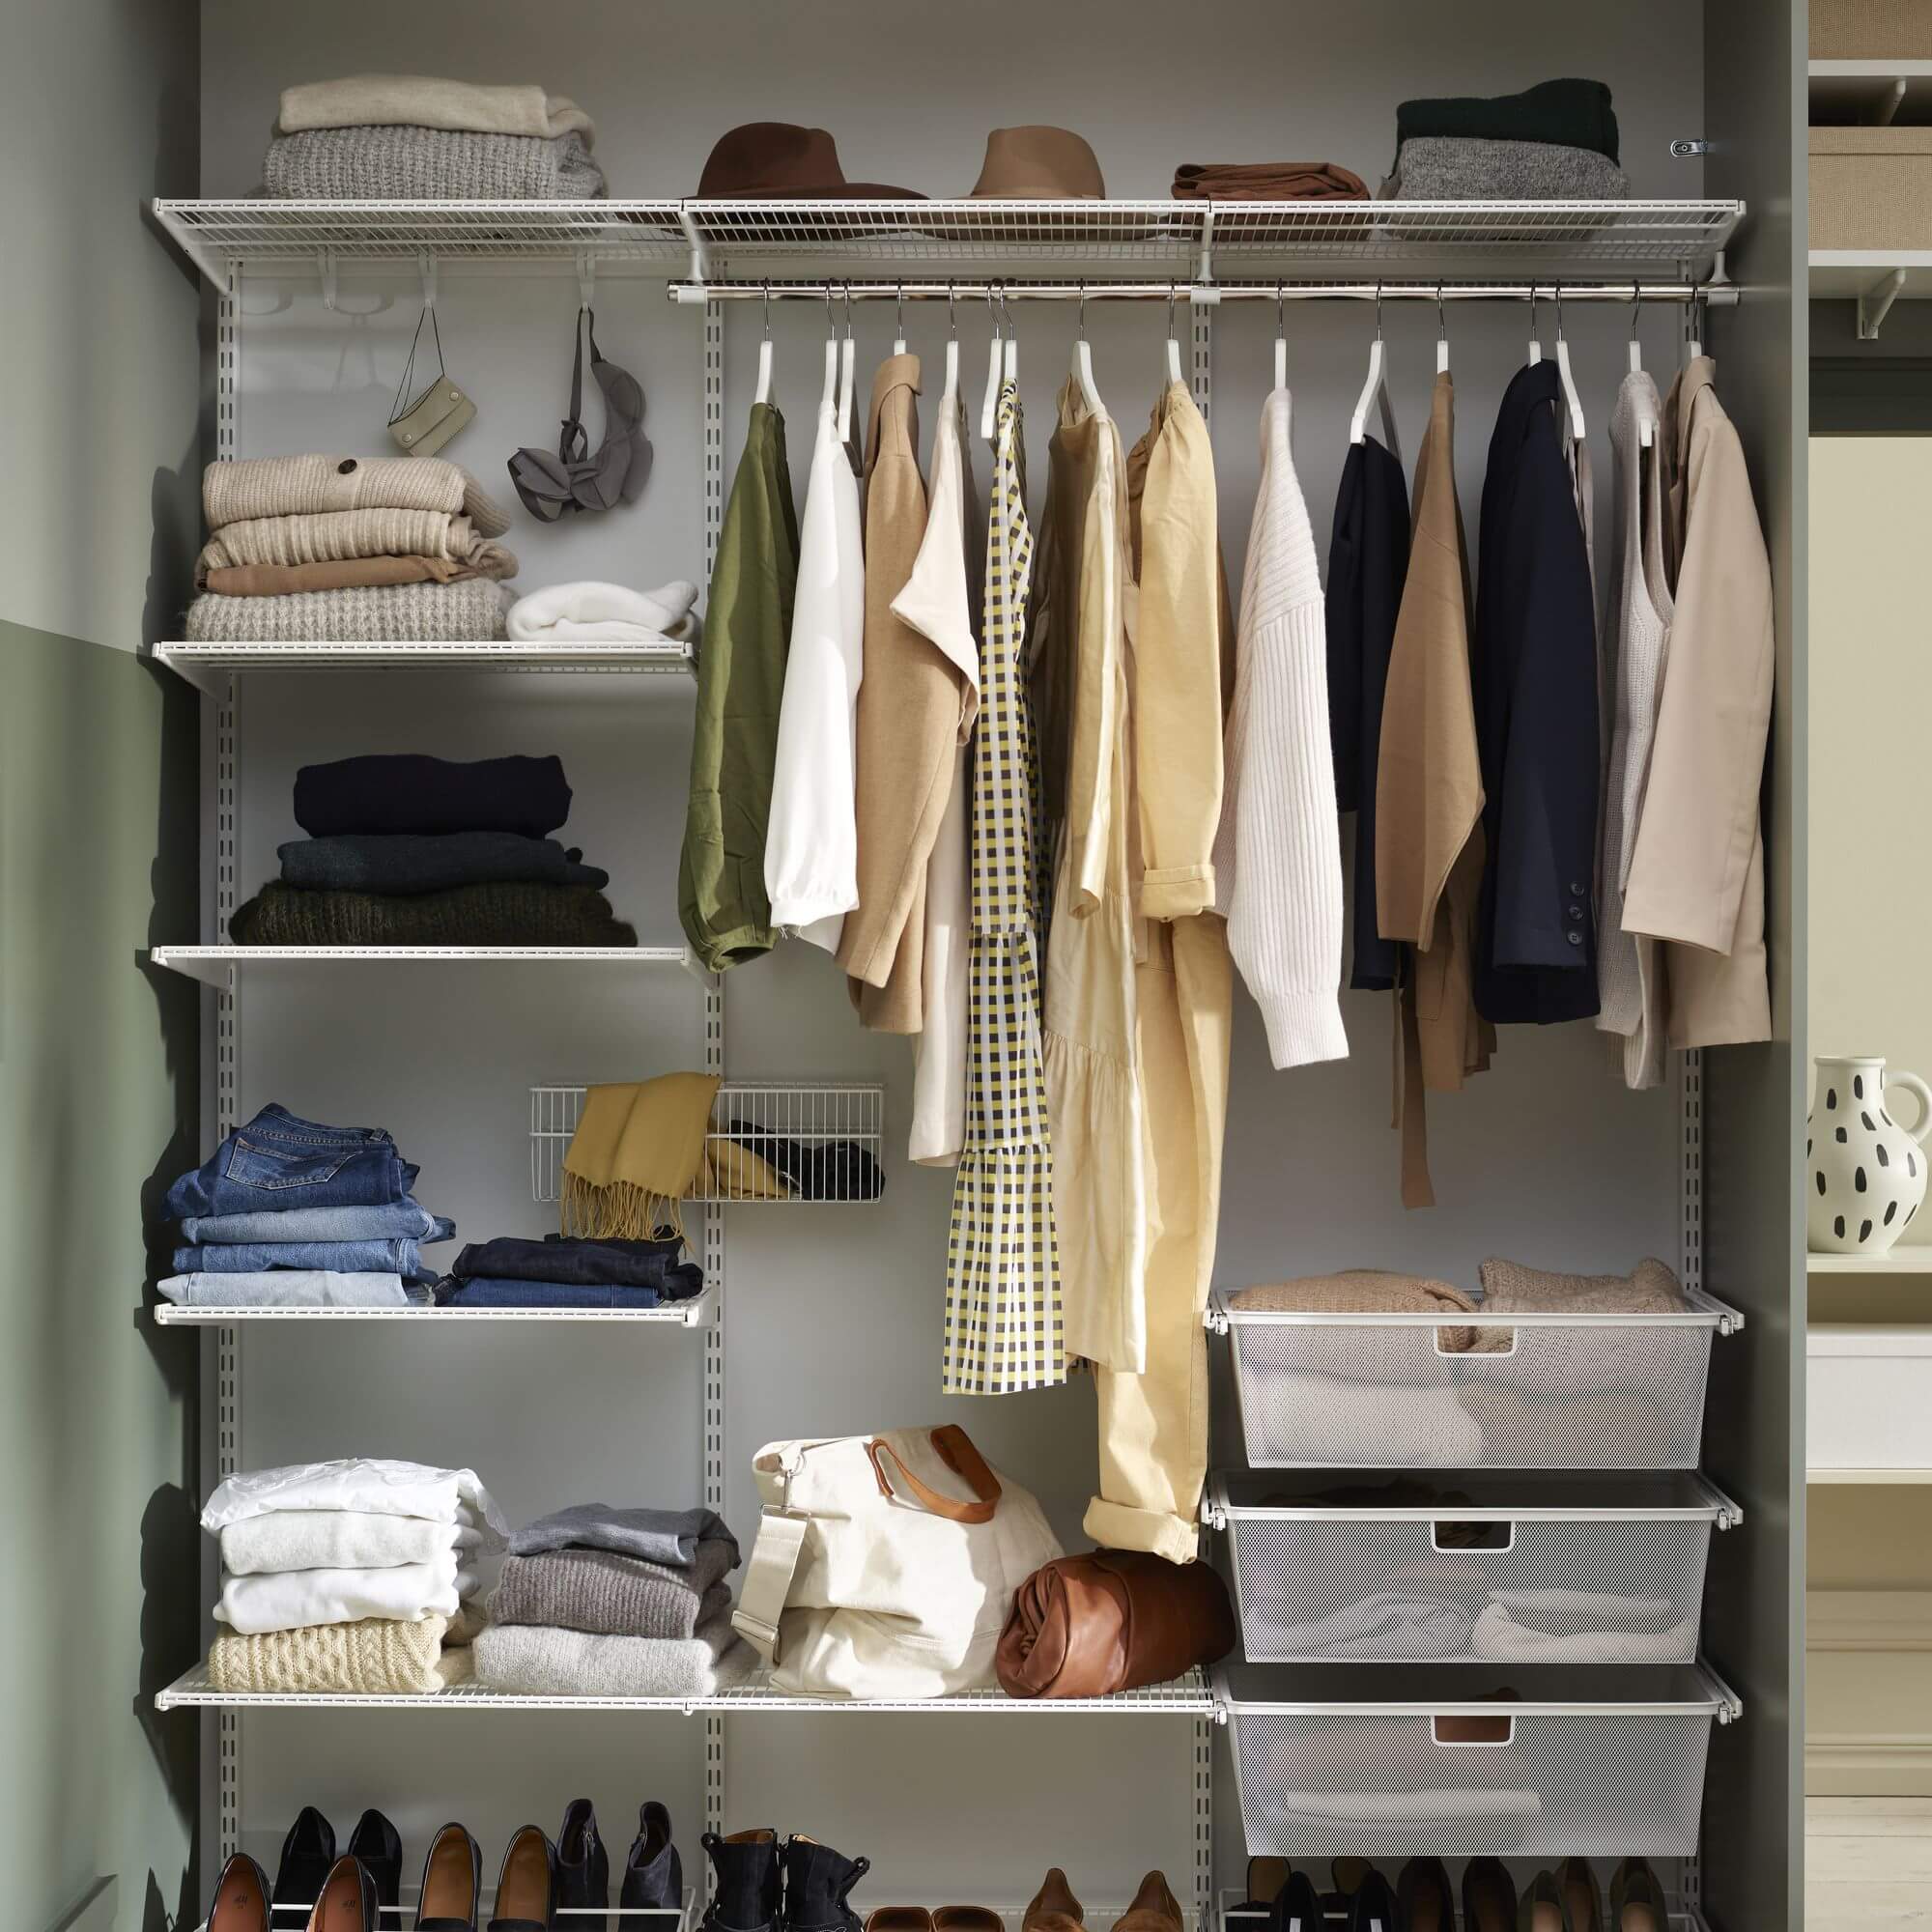 An Elfa wardrobe system with Wire Shelves, Gliding Mesh Drawers and Gliding Shoe Racks